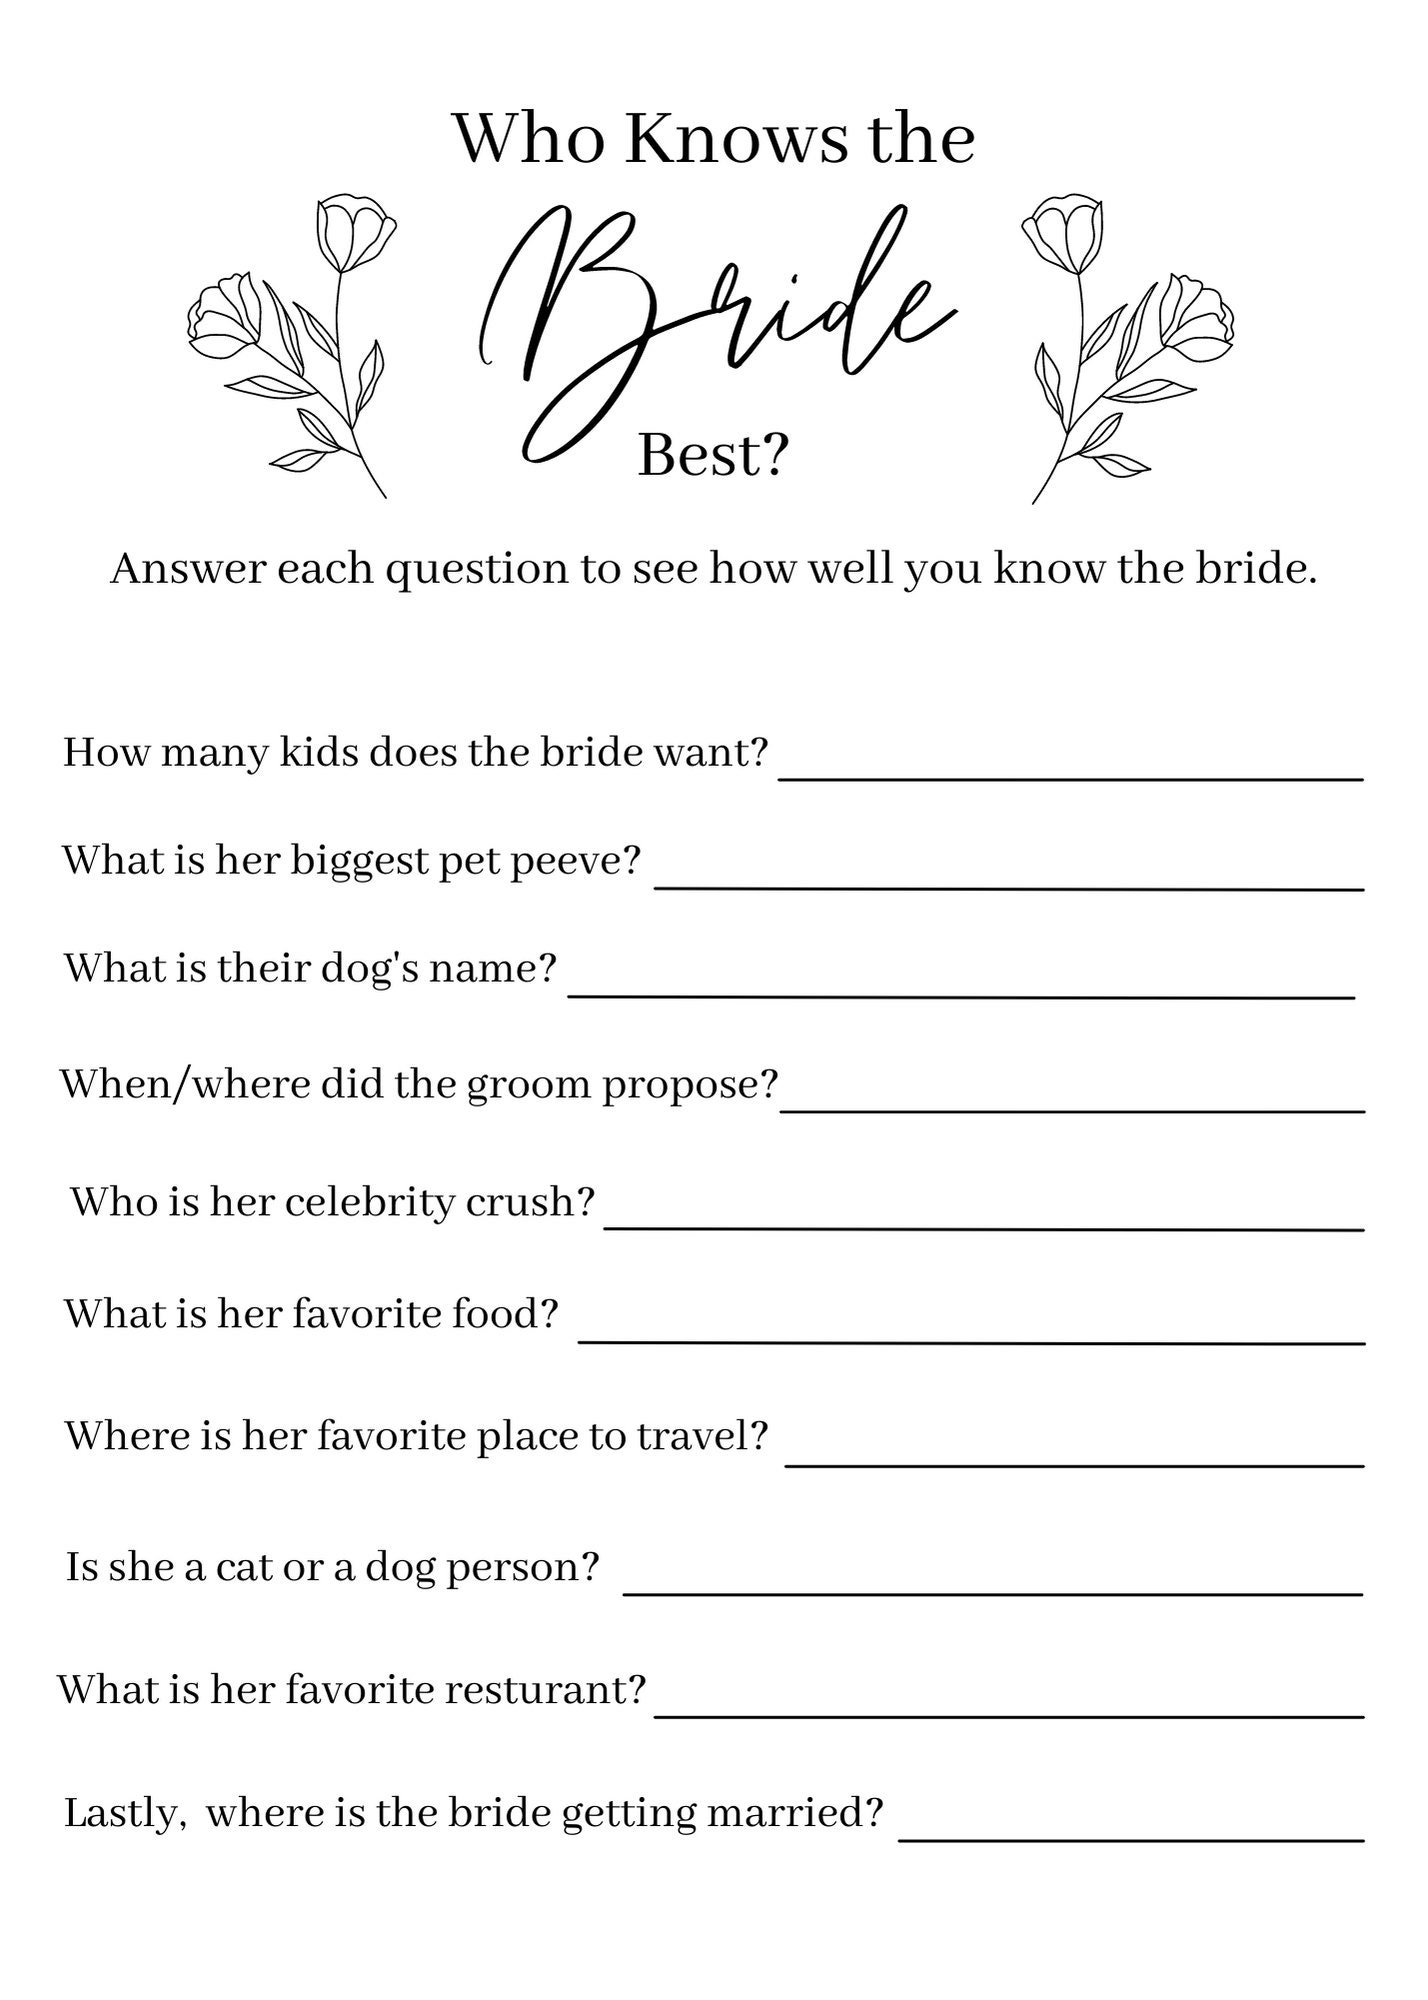 Who Knows the Bride Best Party Game, Printable, Bridal Party Games ...